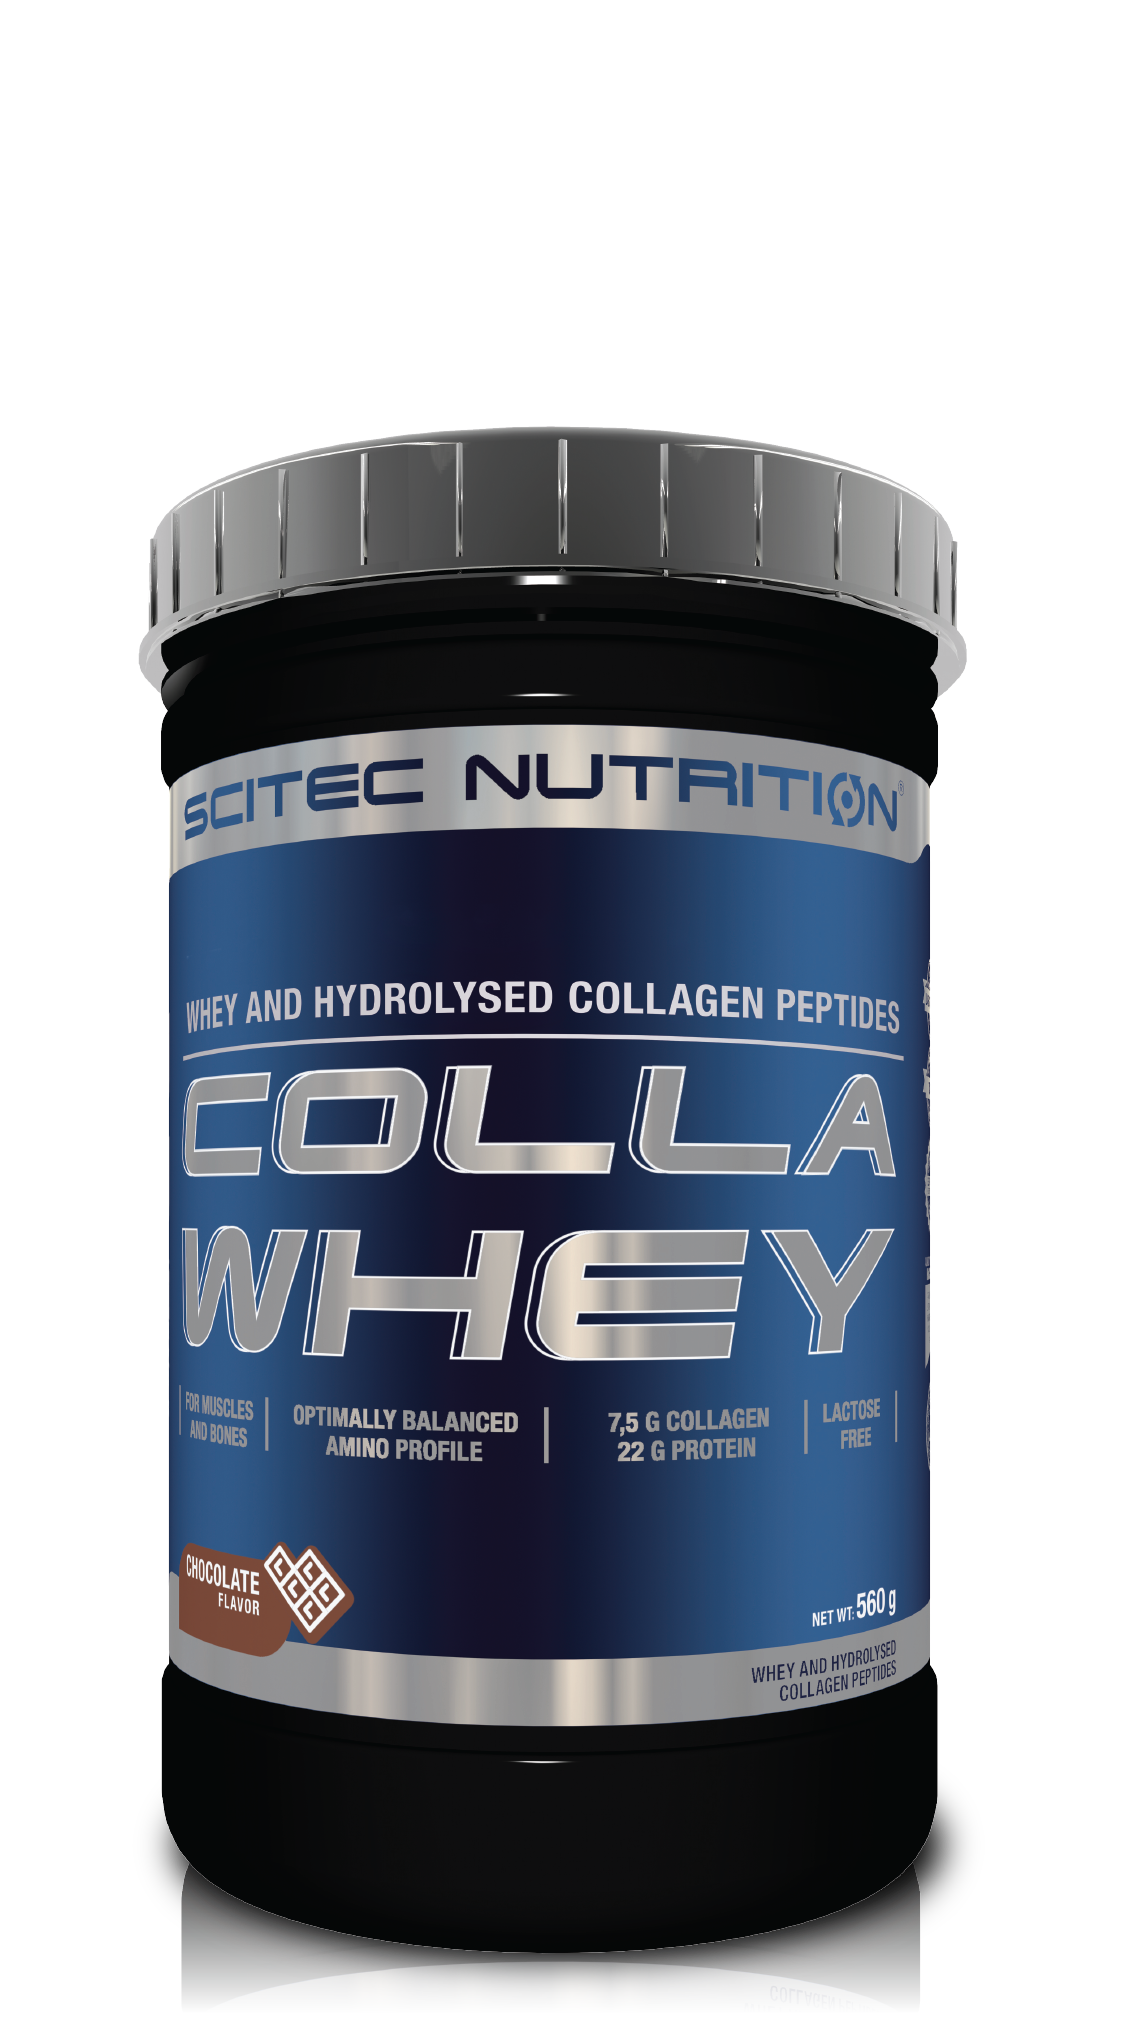 Collawhey (Functional food)